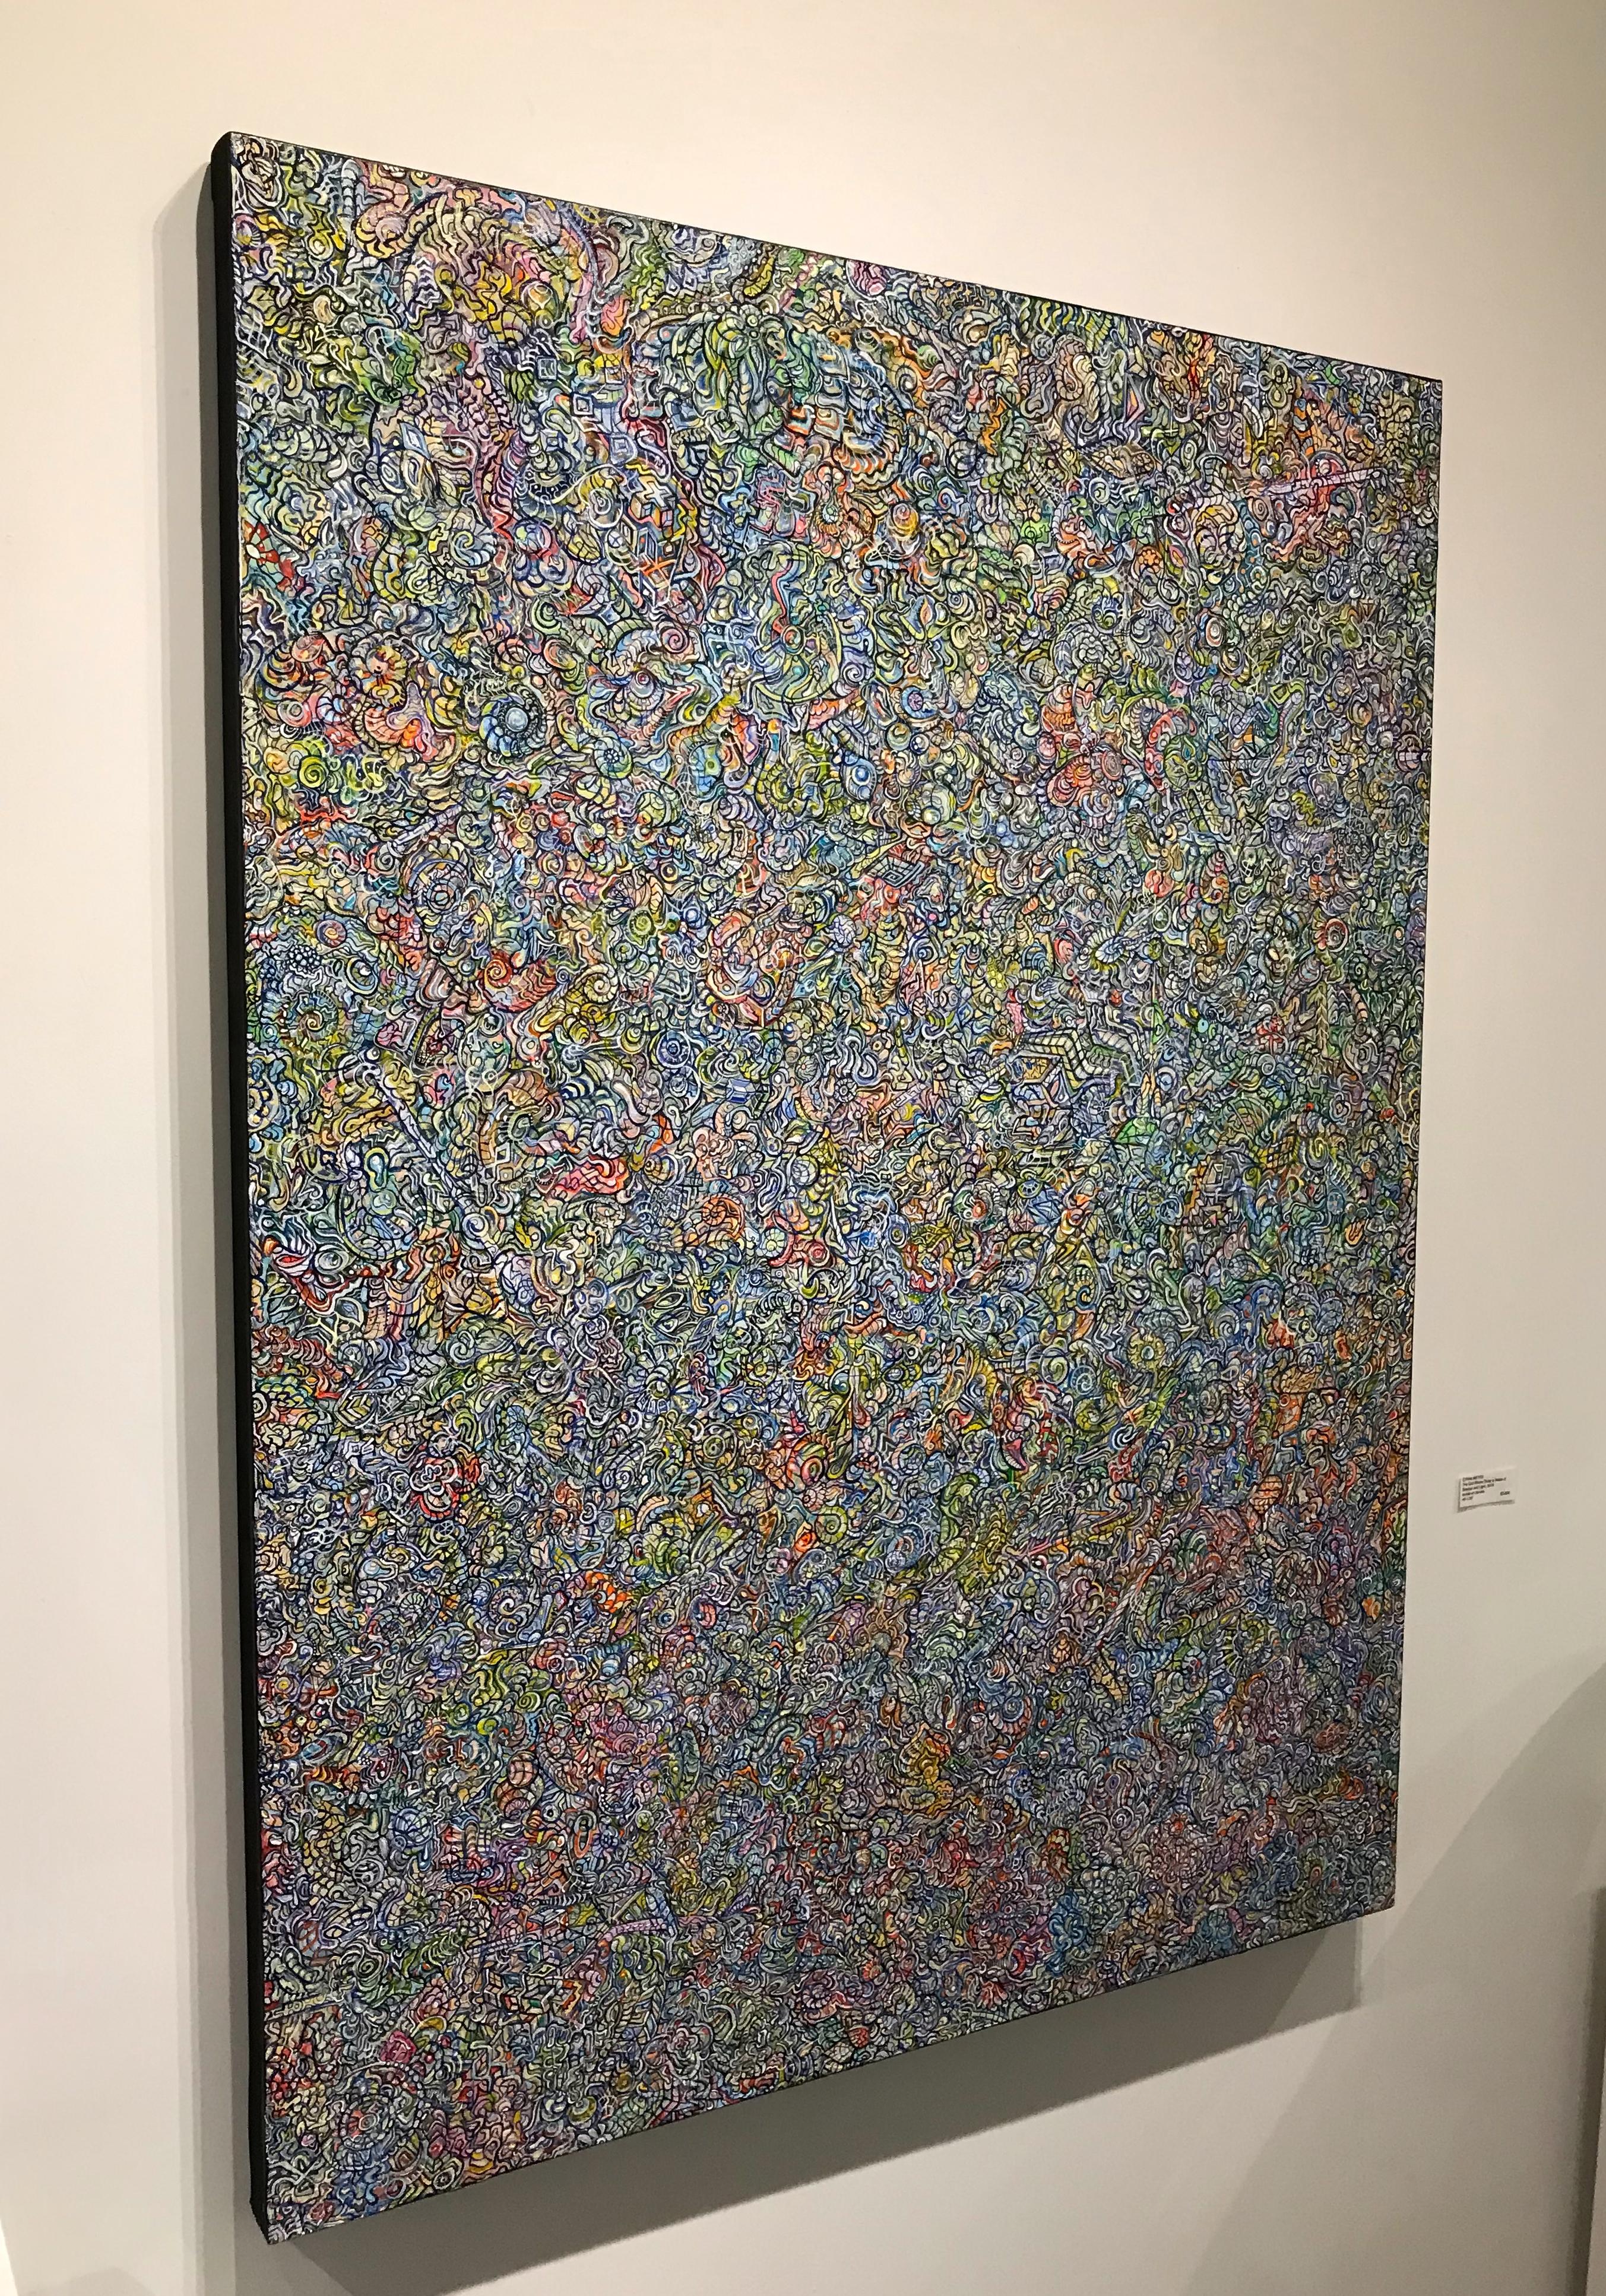 Meyer's work explores themes of esotericism through painting and mixed media sculpture.  Utilizing a maximalist approach, the overall effect is of a space that is both rhythmic and organic. Using markings that are geometric and spatially dense,